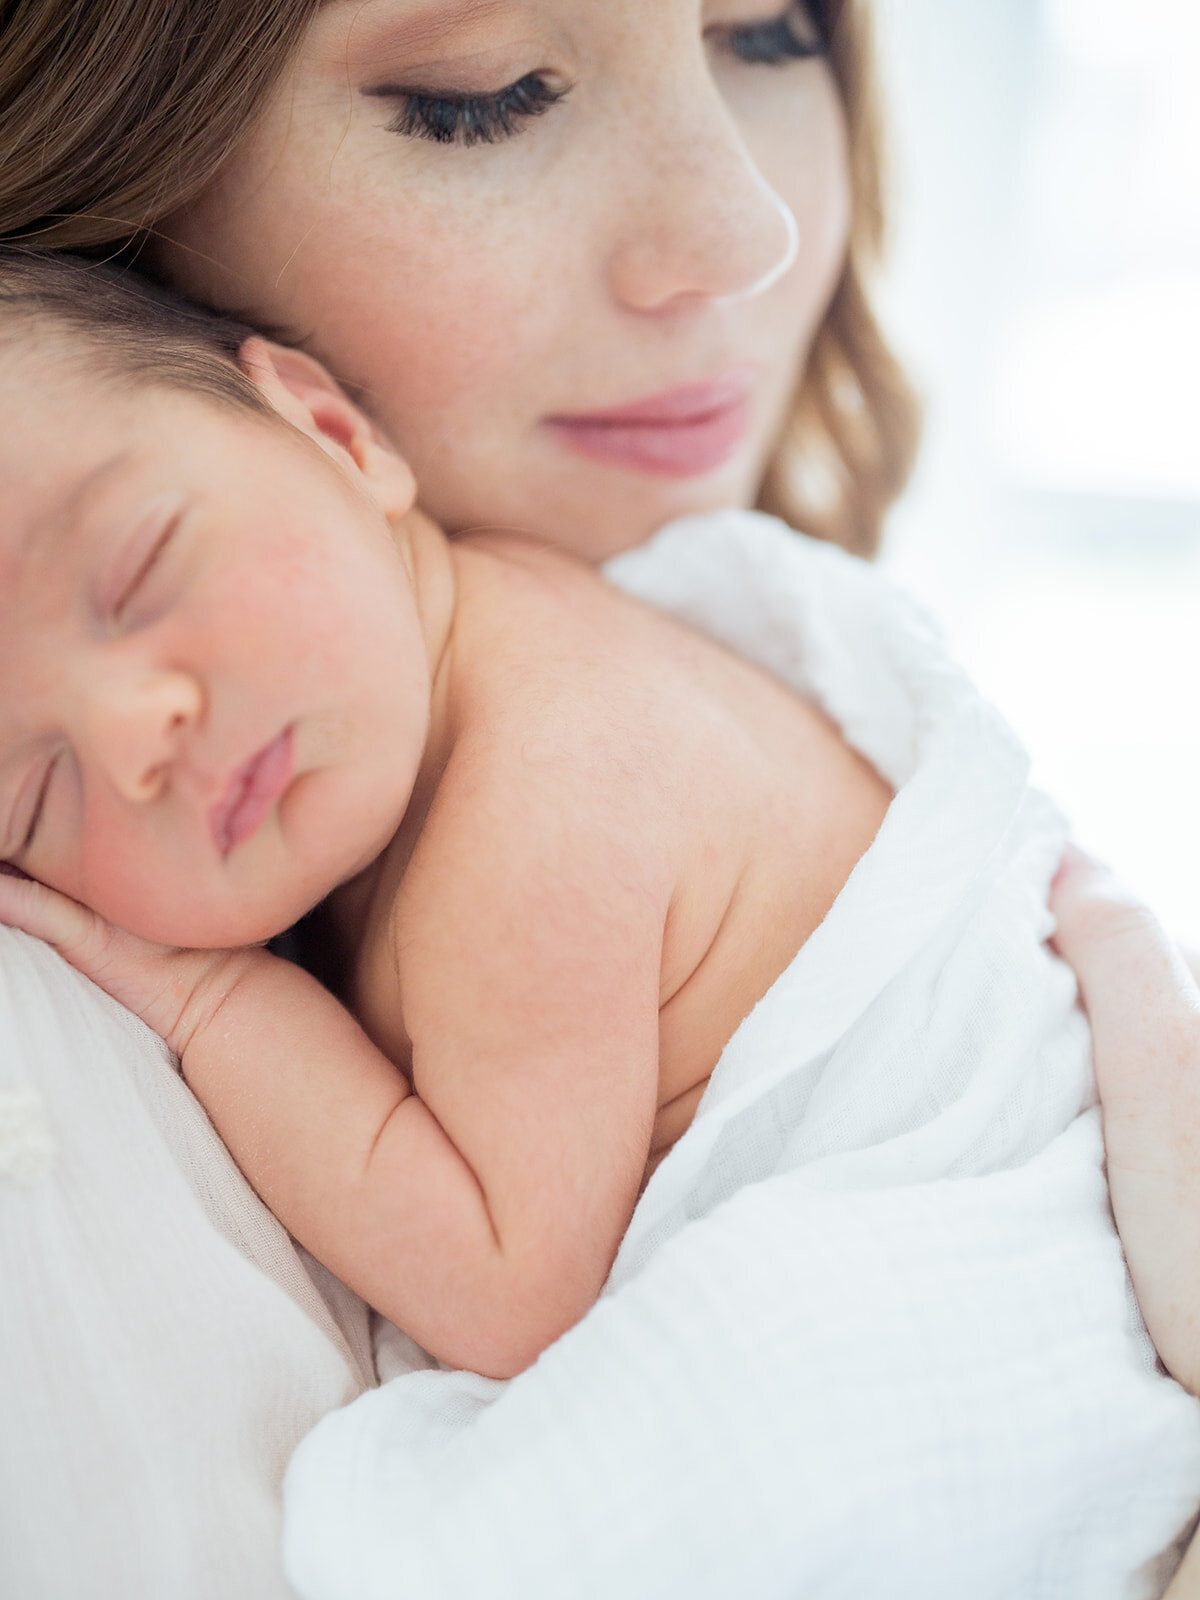 Close-up image of baby boy sleeping on his mother's chest as she closes her eyes holding him.